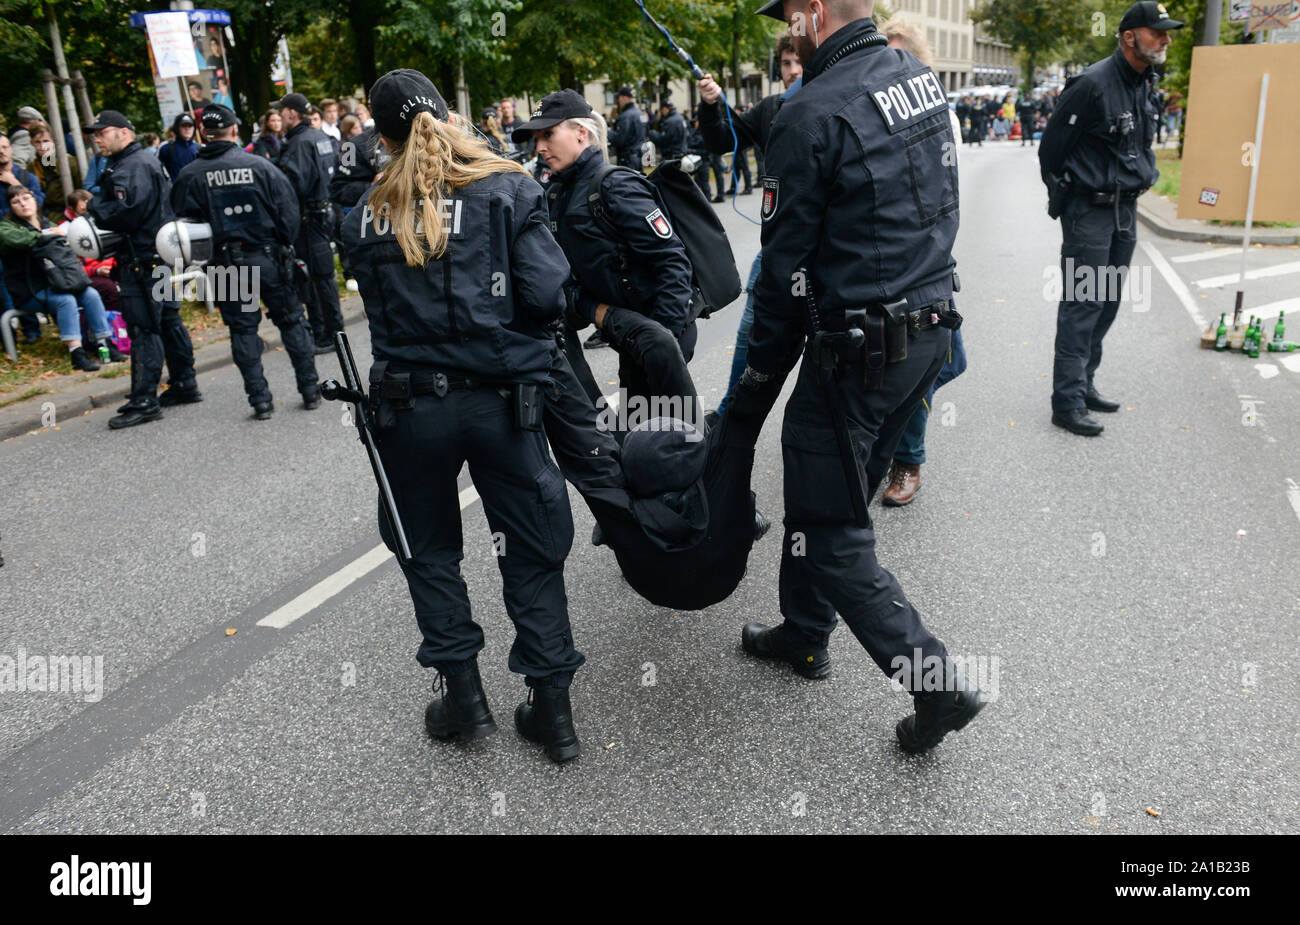 GERMANY, Hamburg city, road blocking for the climate and police actions after Fridays for future rally, clearing of a street blockade by the police Stock Photo